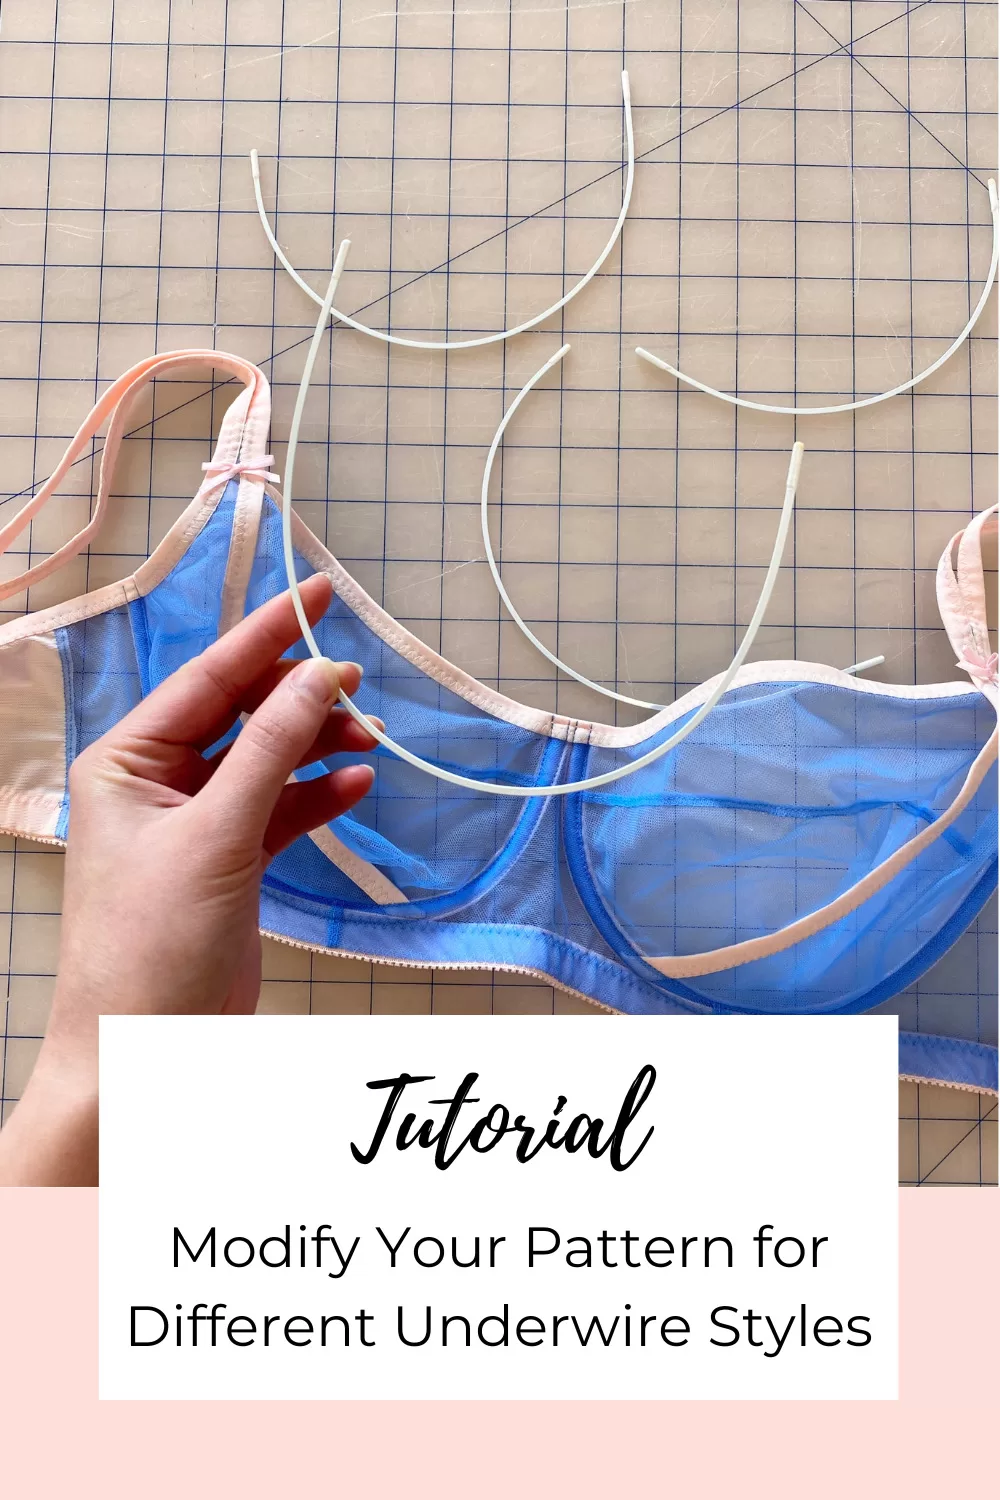 Change Your Bra Pattern for Different Styles of Underwires